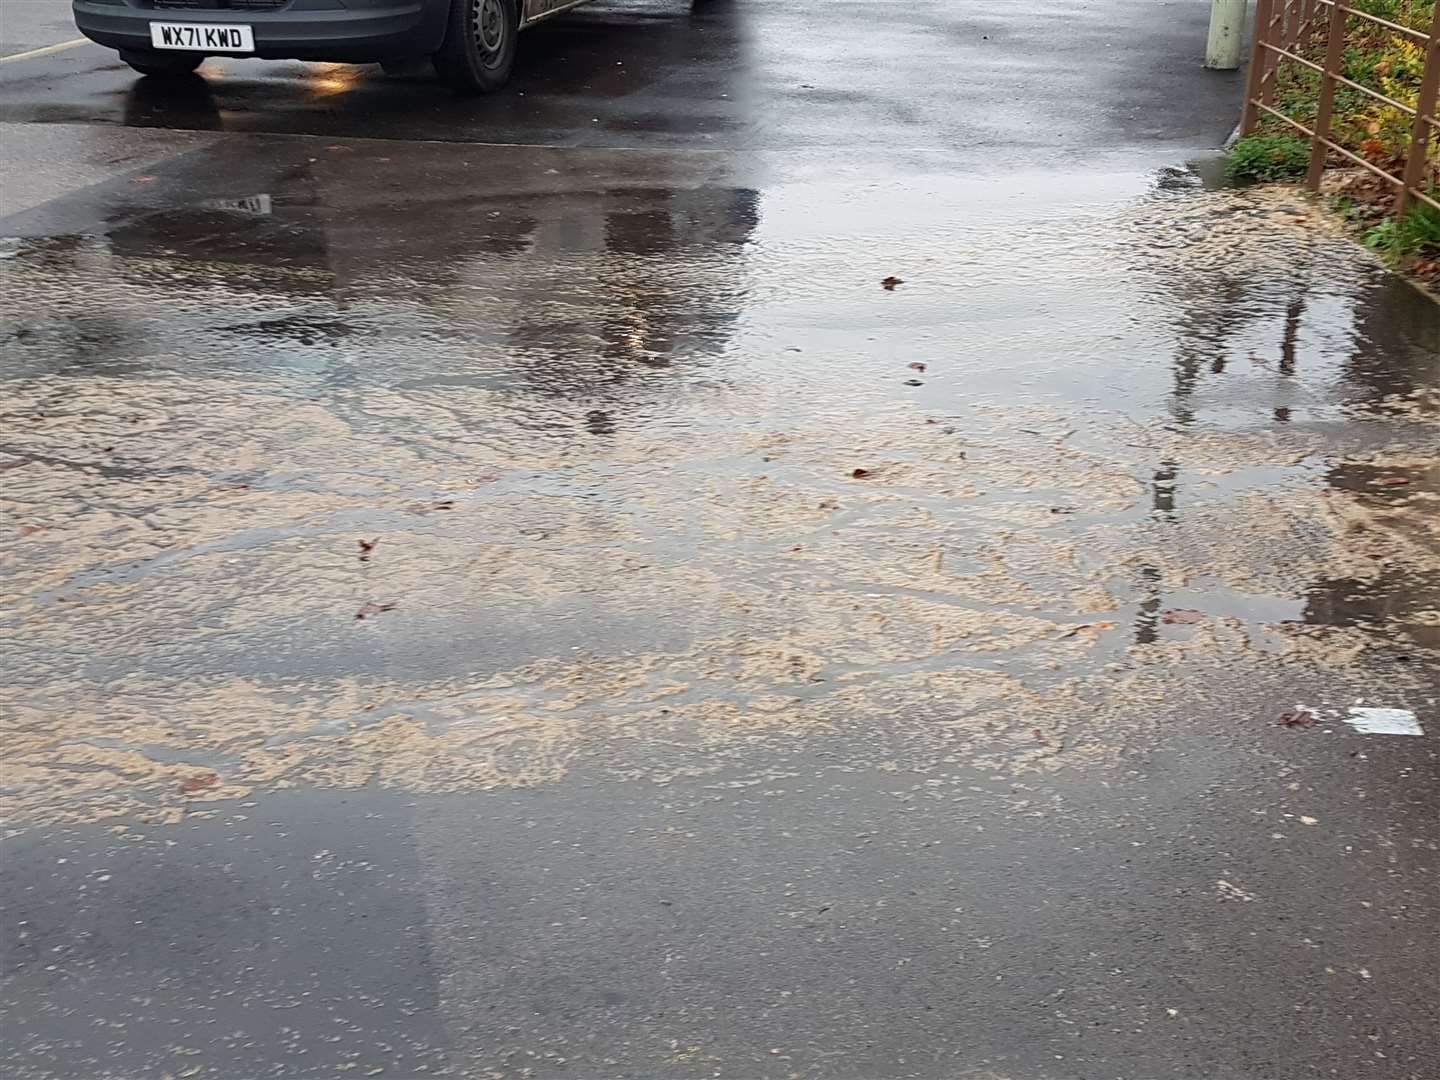 The leak is covering part of the pavement